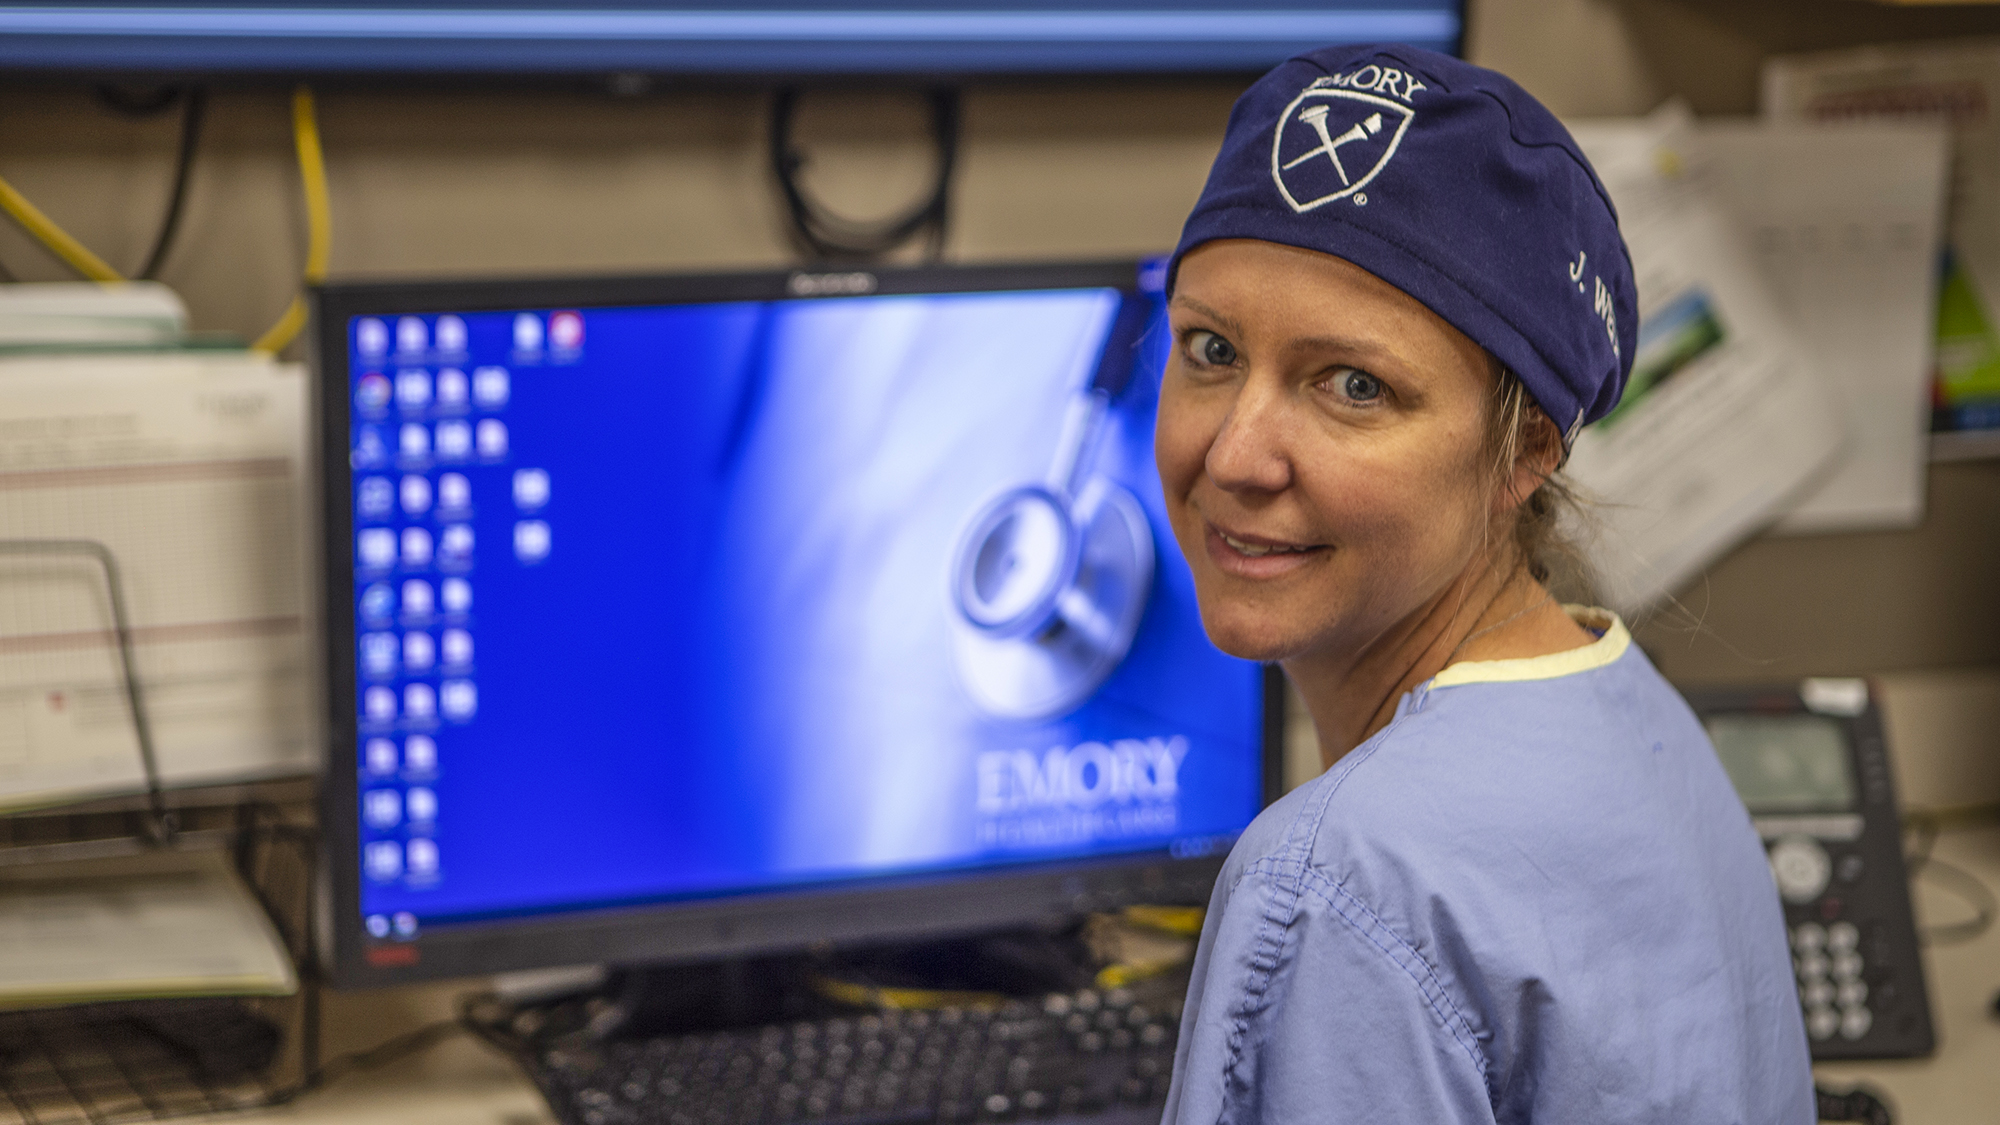 Dr. Jill Wells, in scrubs, sitting in front of a computer after performing surgery